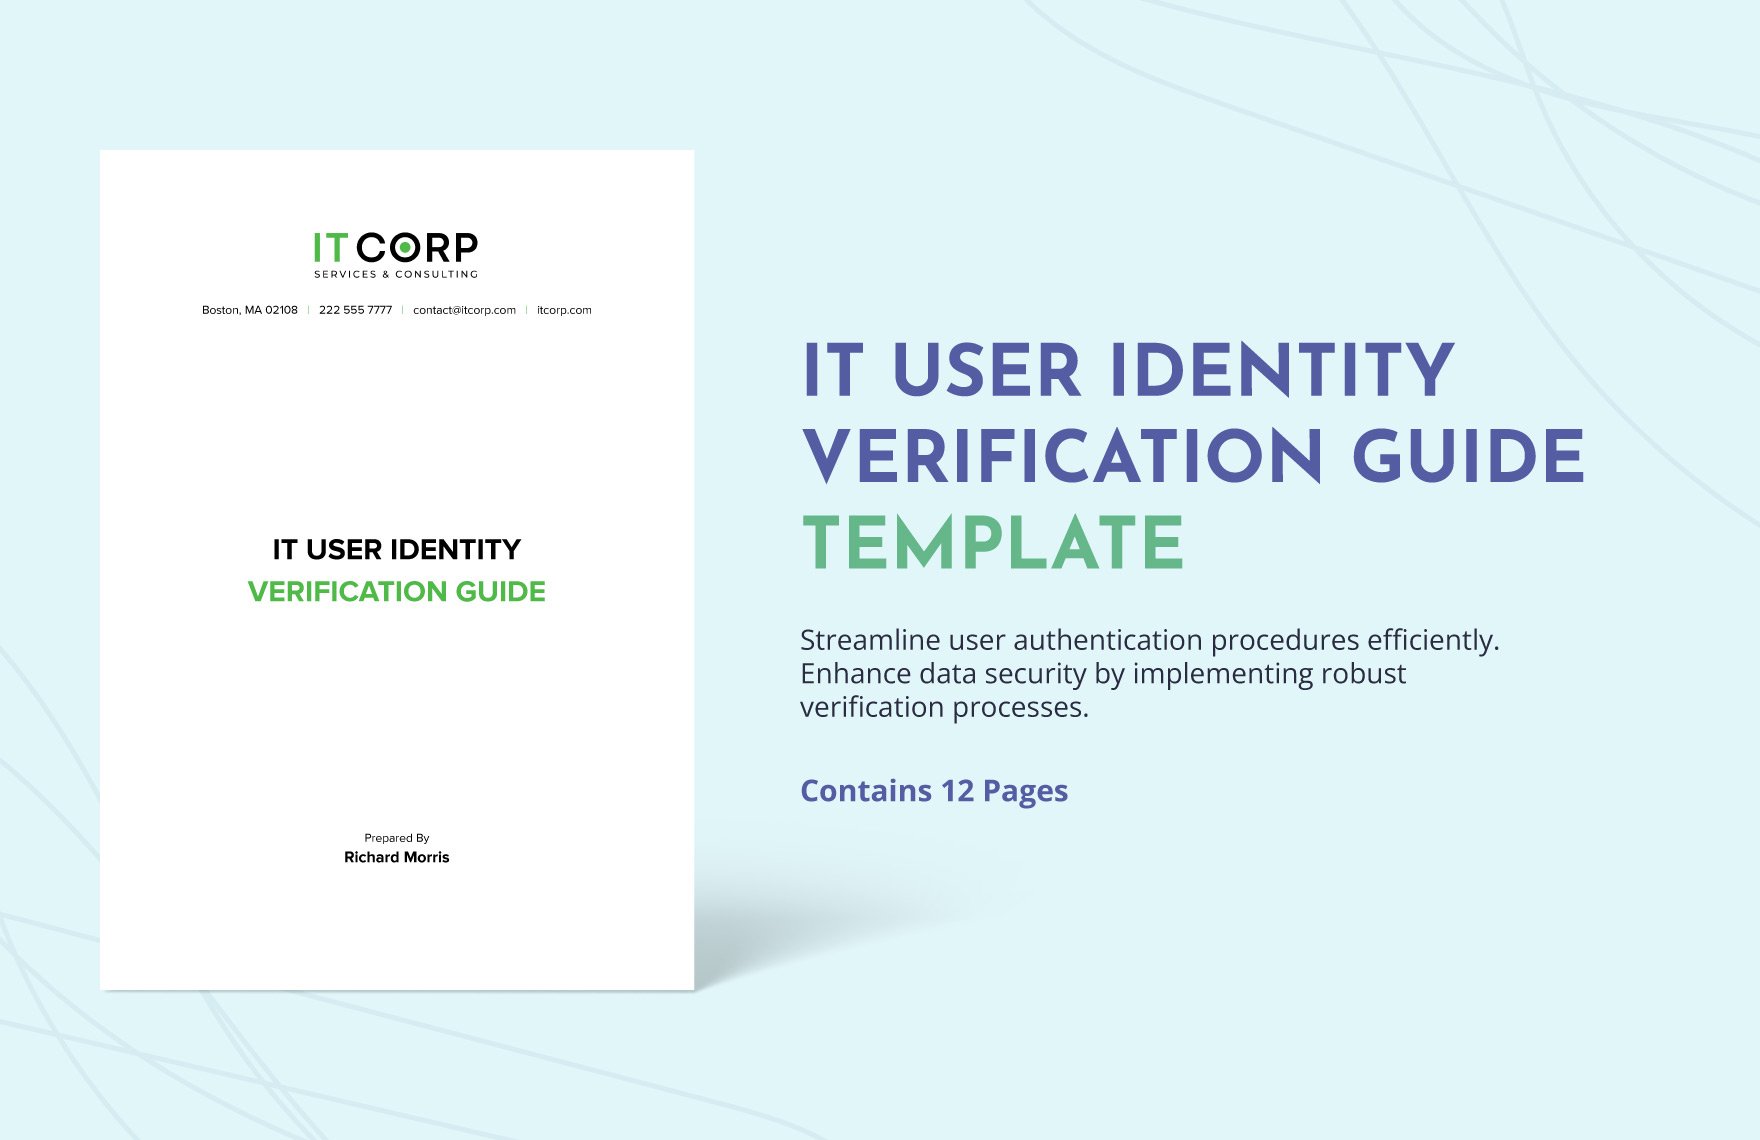 IT User Identity Verification Guide Template in Word, Google Docs, PDF